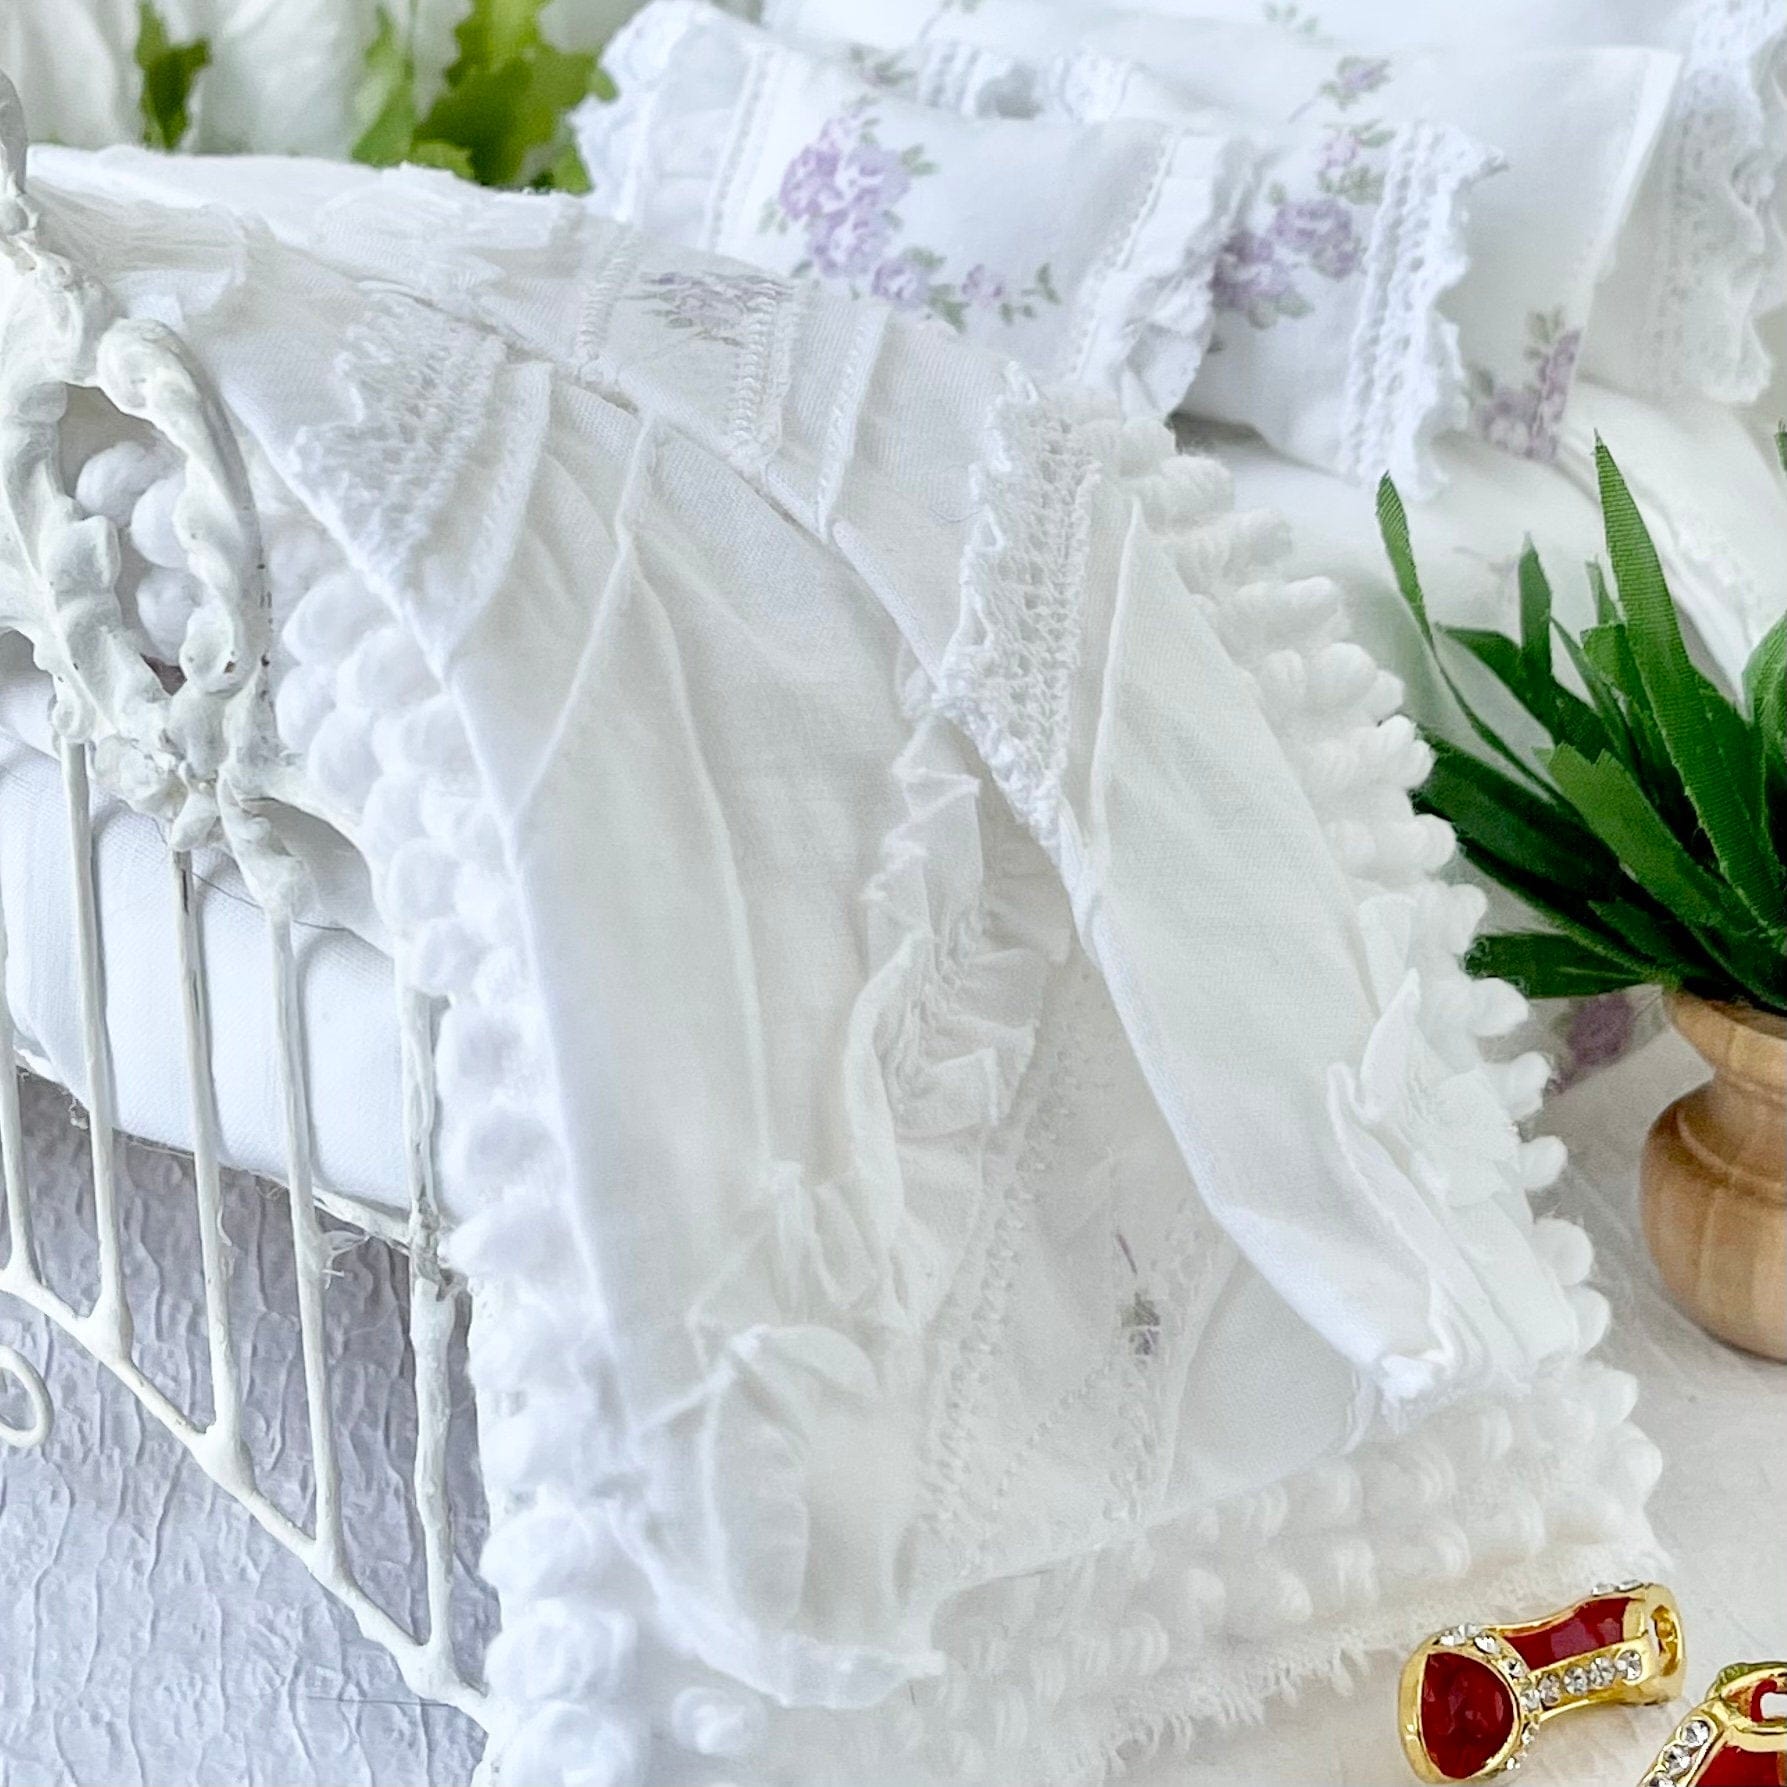 Chantallena Doll House Shabby Cottage - Eight Piece Lavender & Lilac Floral Cotton Bedding Set